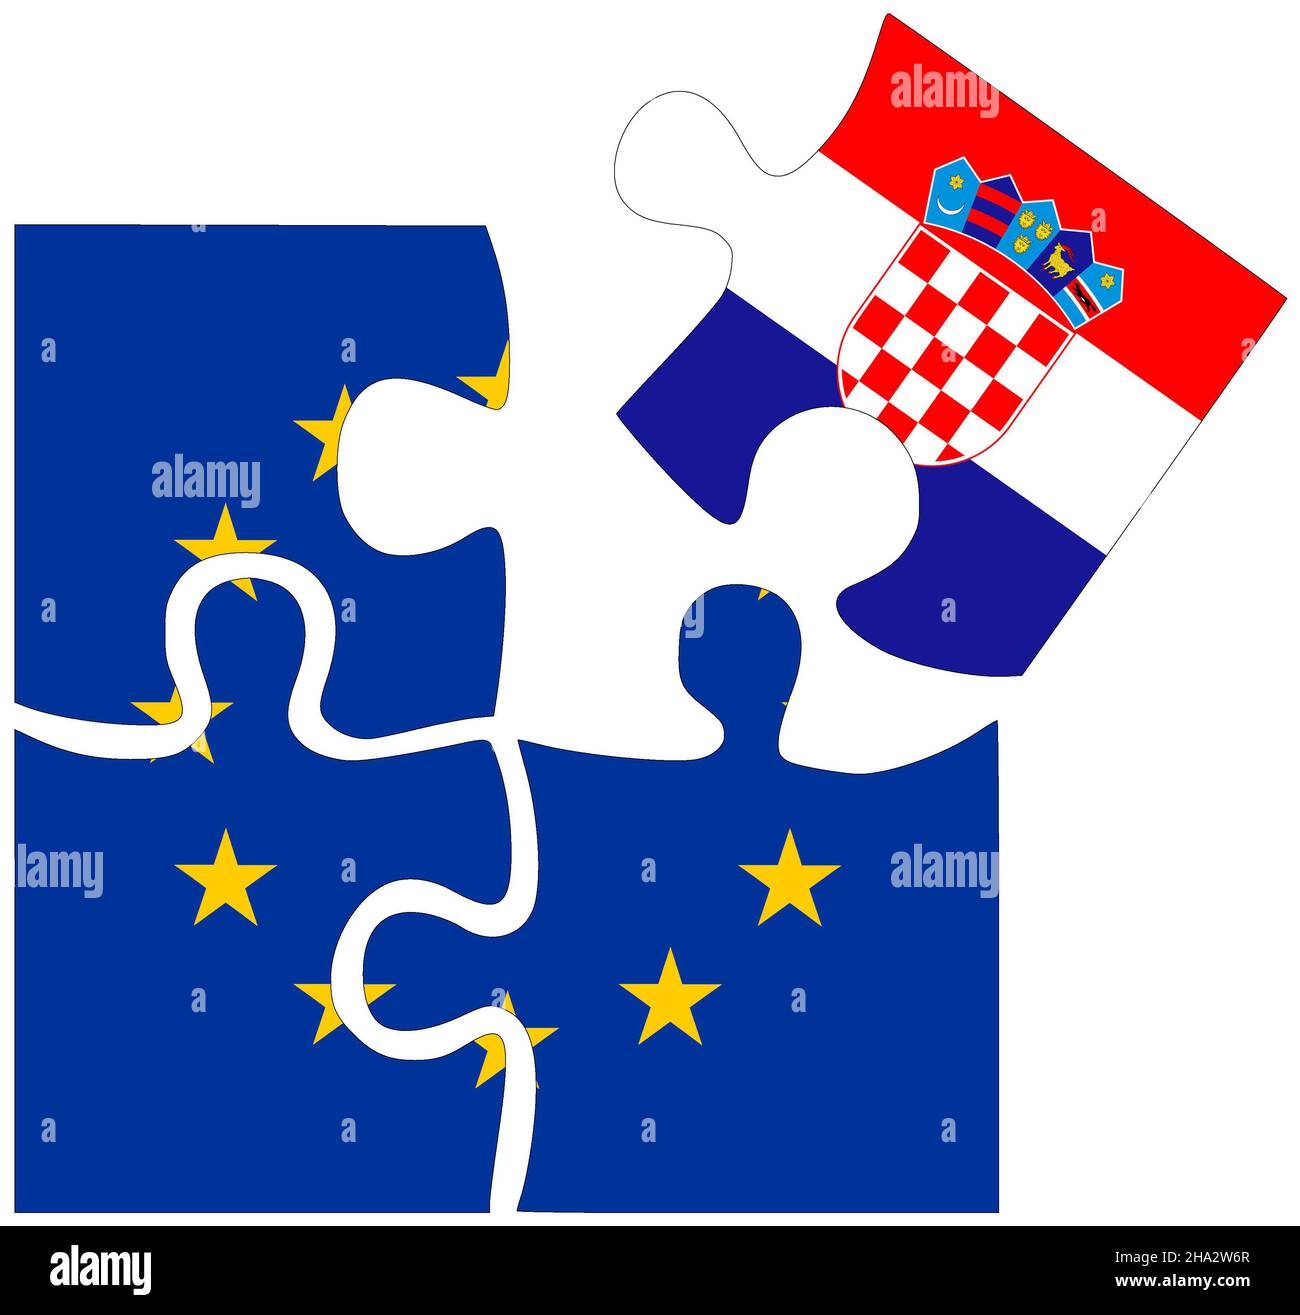 EU - Croatia : puzzle shapes with flags, symbol of agreement or friendship Stock Photo